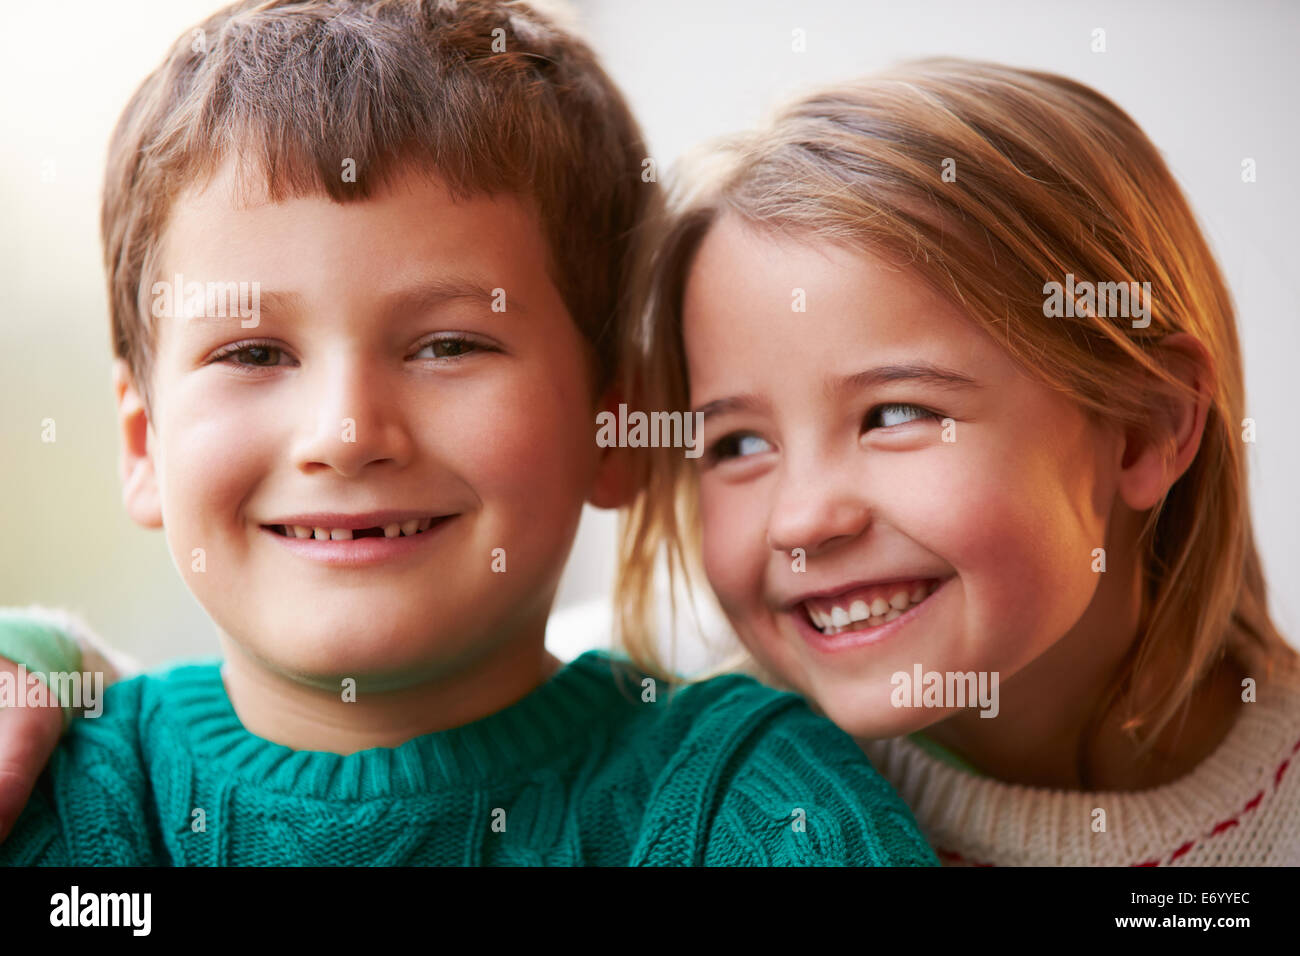 Indoor Portrait Of Brother And Sister Stock Photo